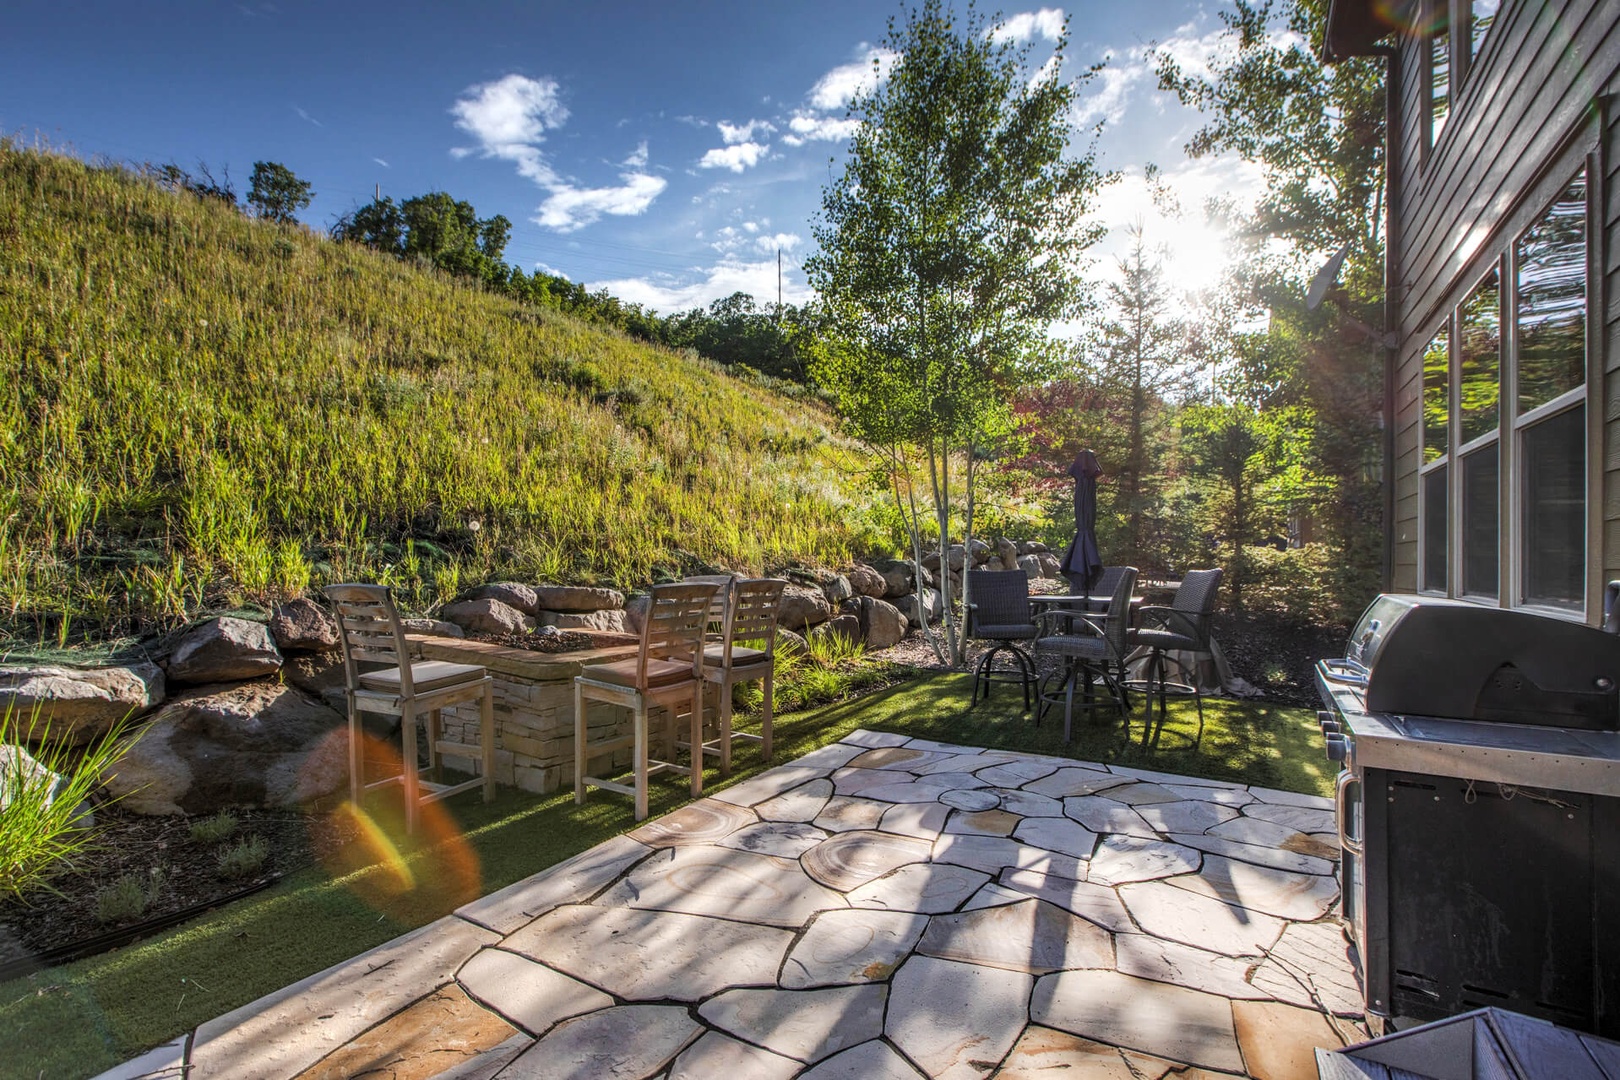 Retreat at Jordanelle 915 by Moose Management: Backyard oasis! Outdoor dining and firepet